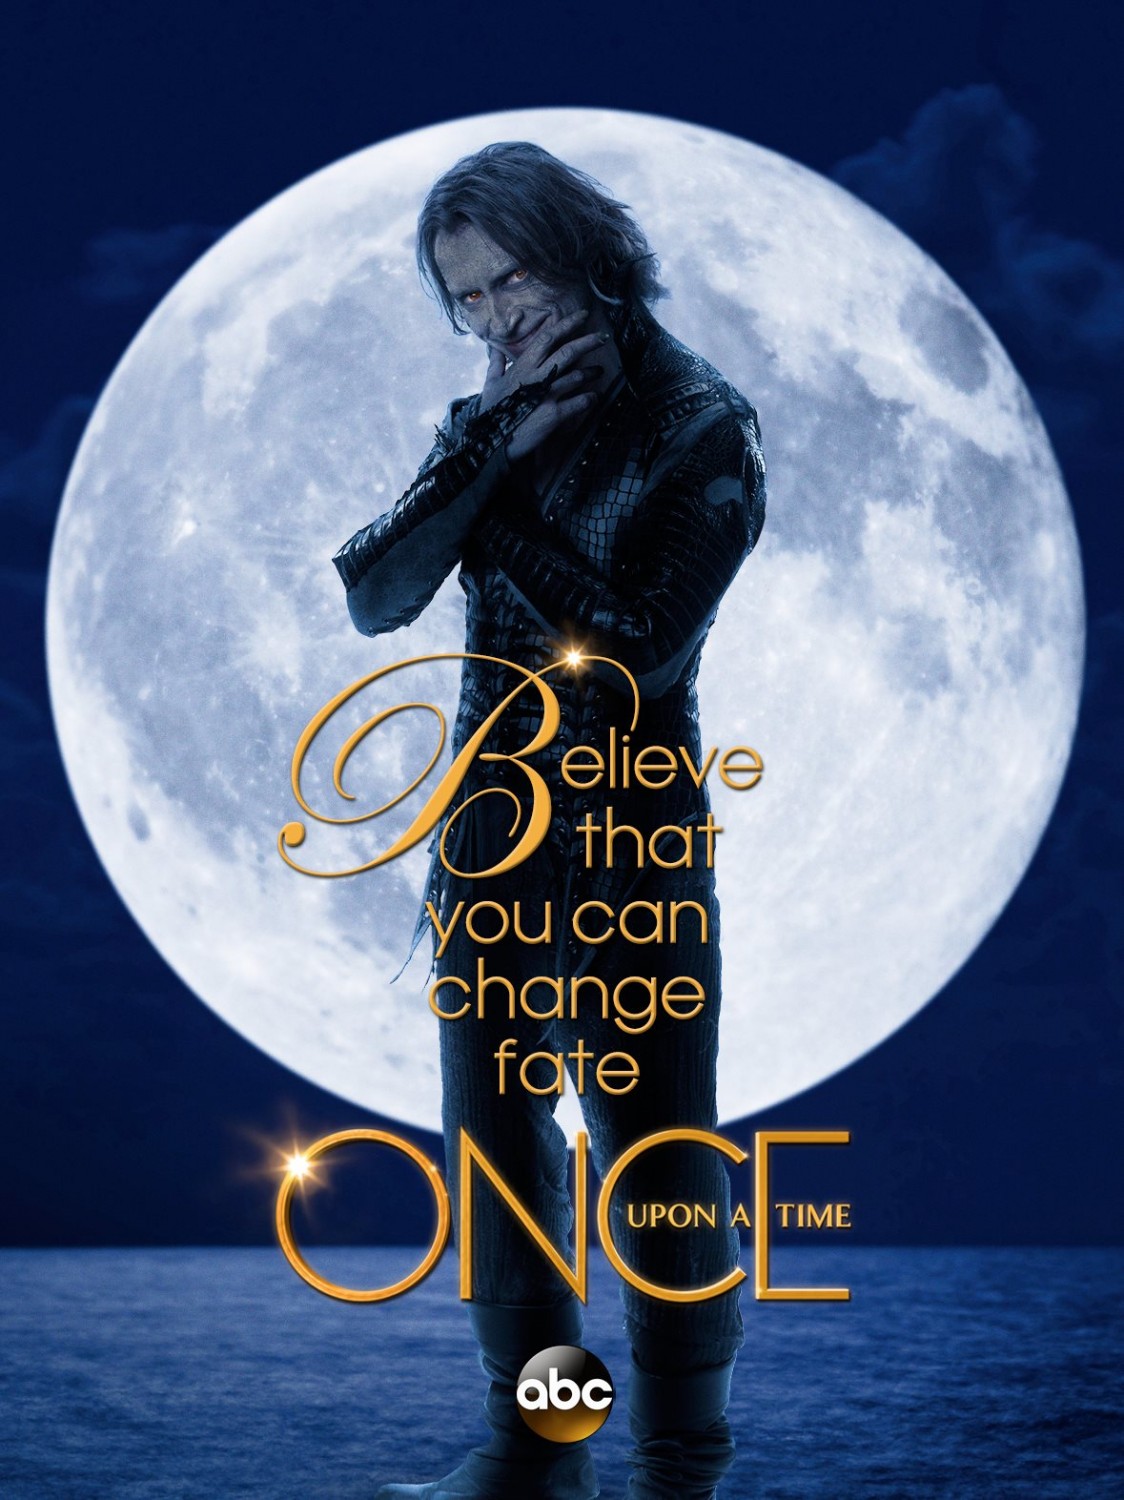 Extra Large TV Poster Image for Once Upon a Time (#12 of 23)